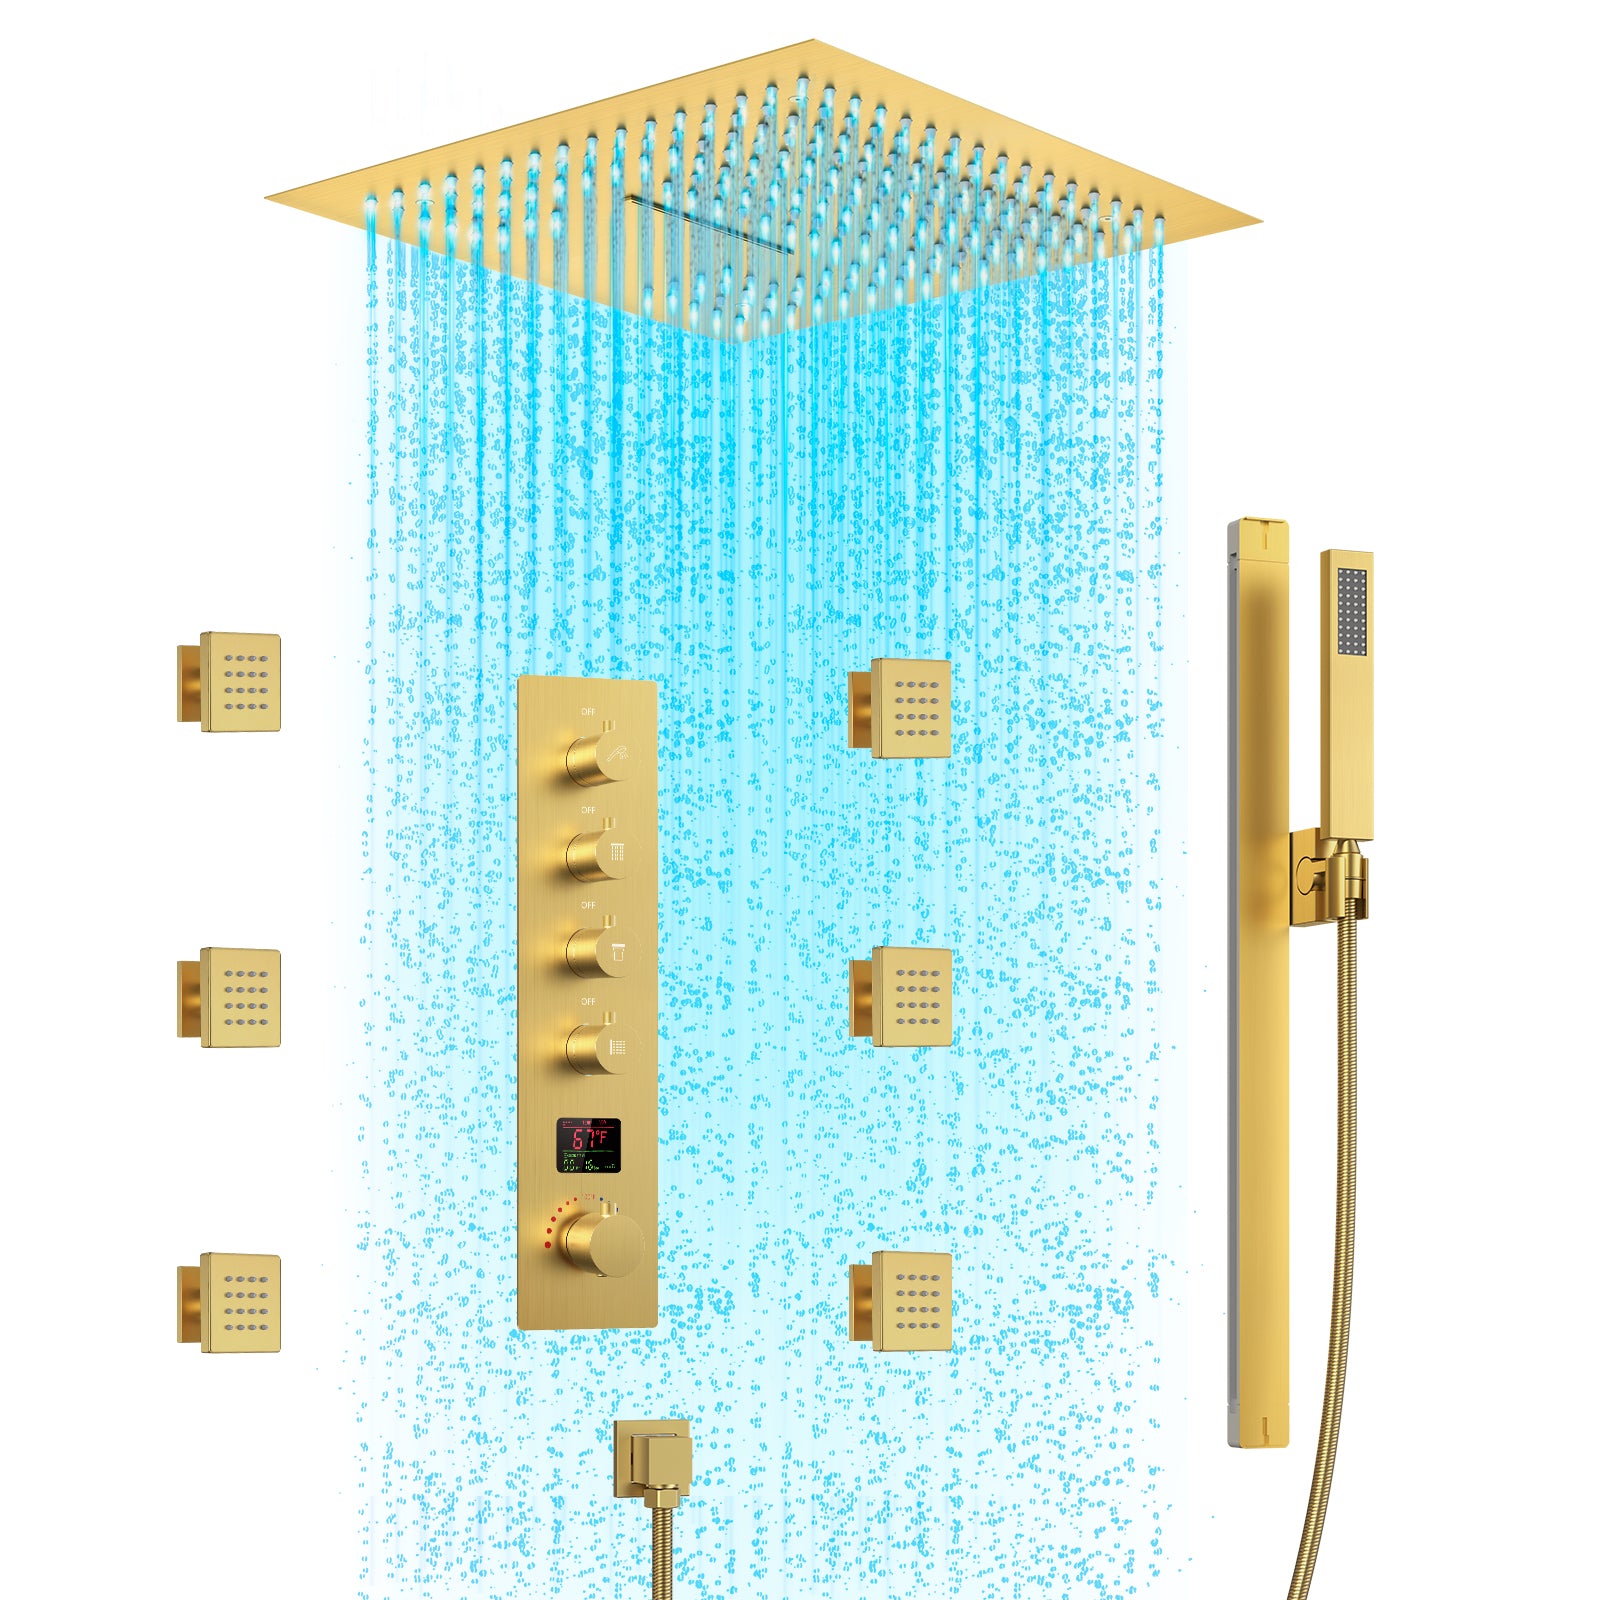 SFS-1027-GD16 EVERSTEIN LED Thermostatic Shower Head System with Rough-in Valve in Brushed Gold